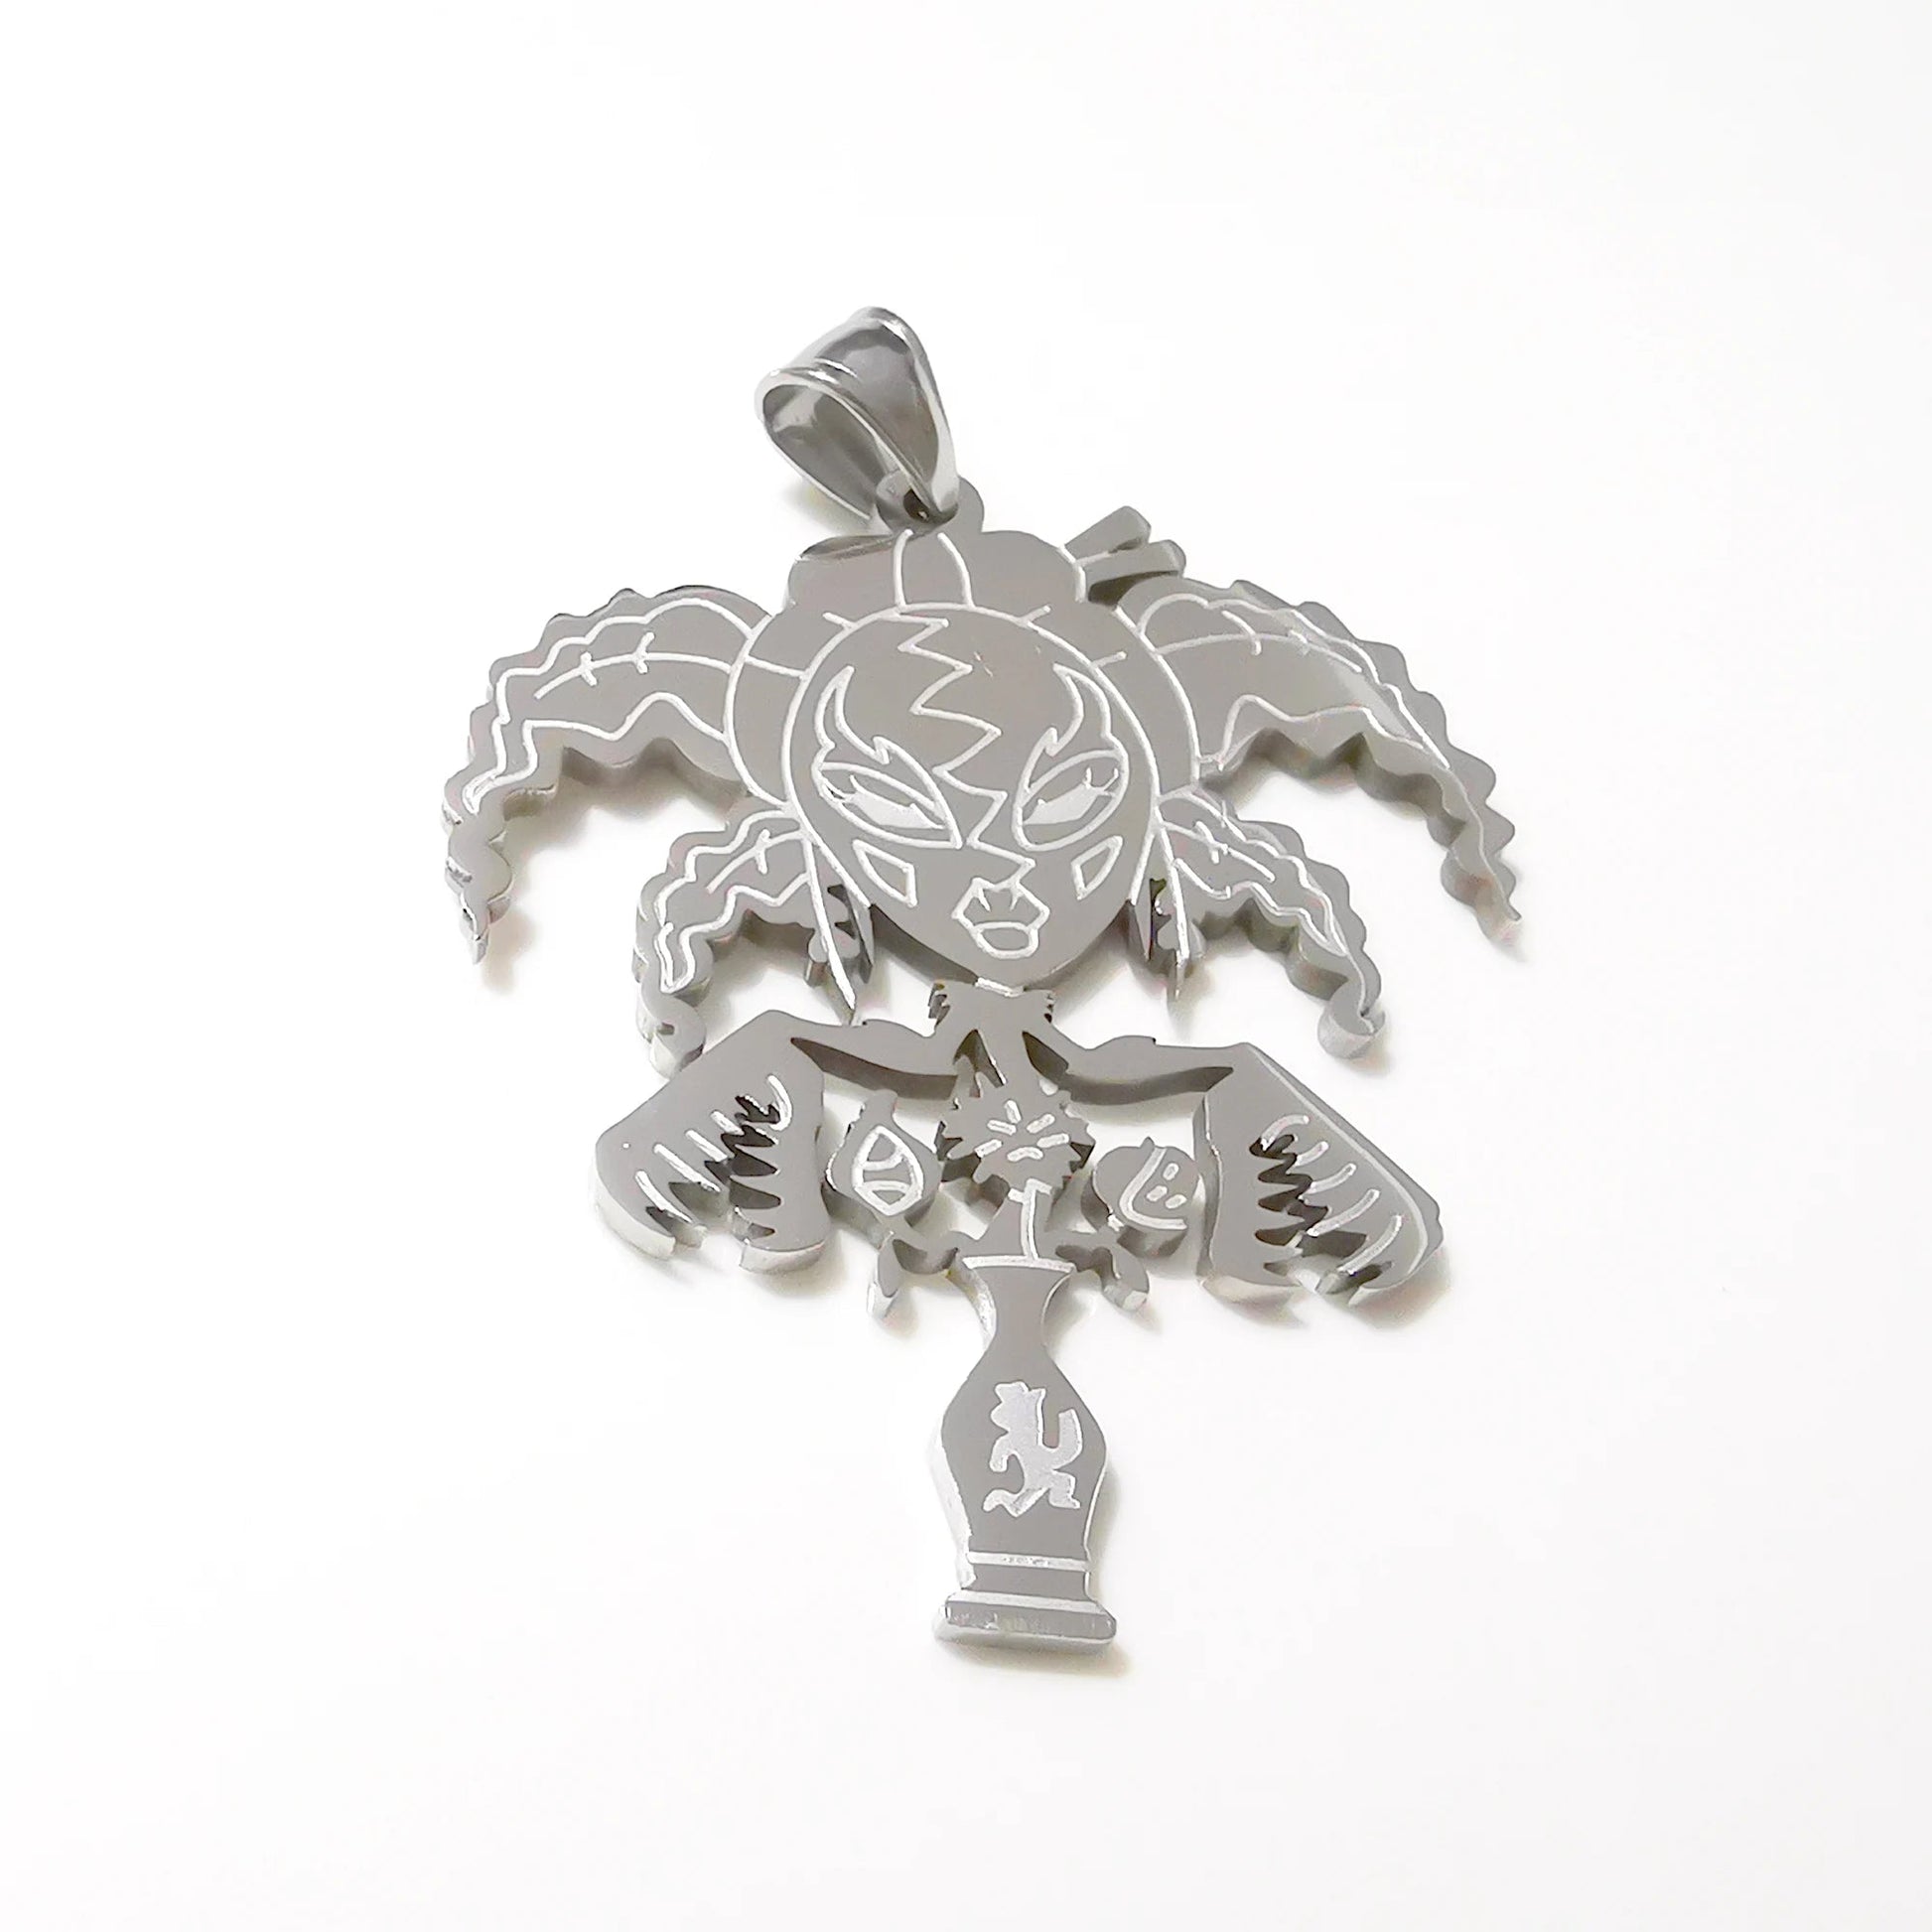 Juggalo Yum Charms Stainless Pendant - The Rave Cave